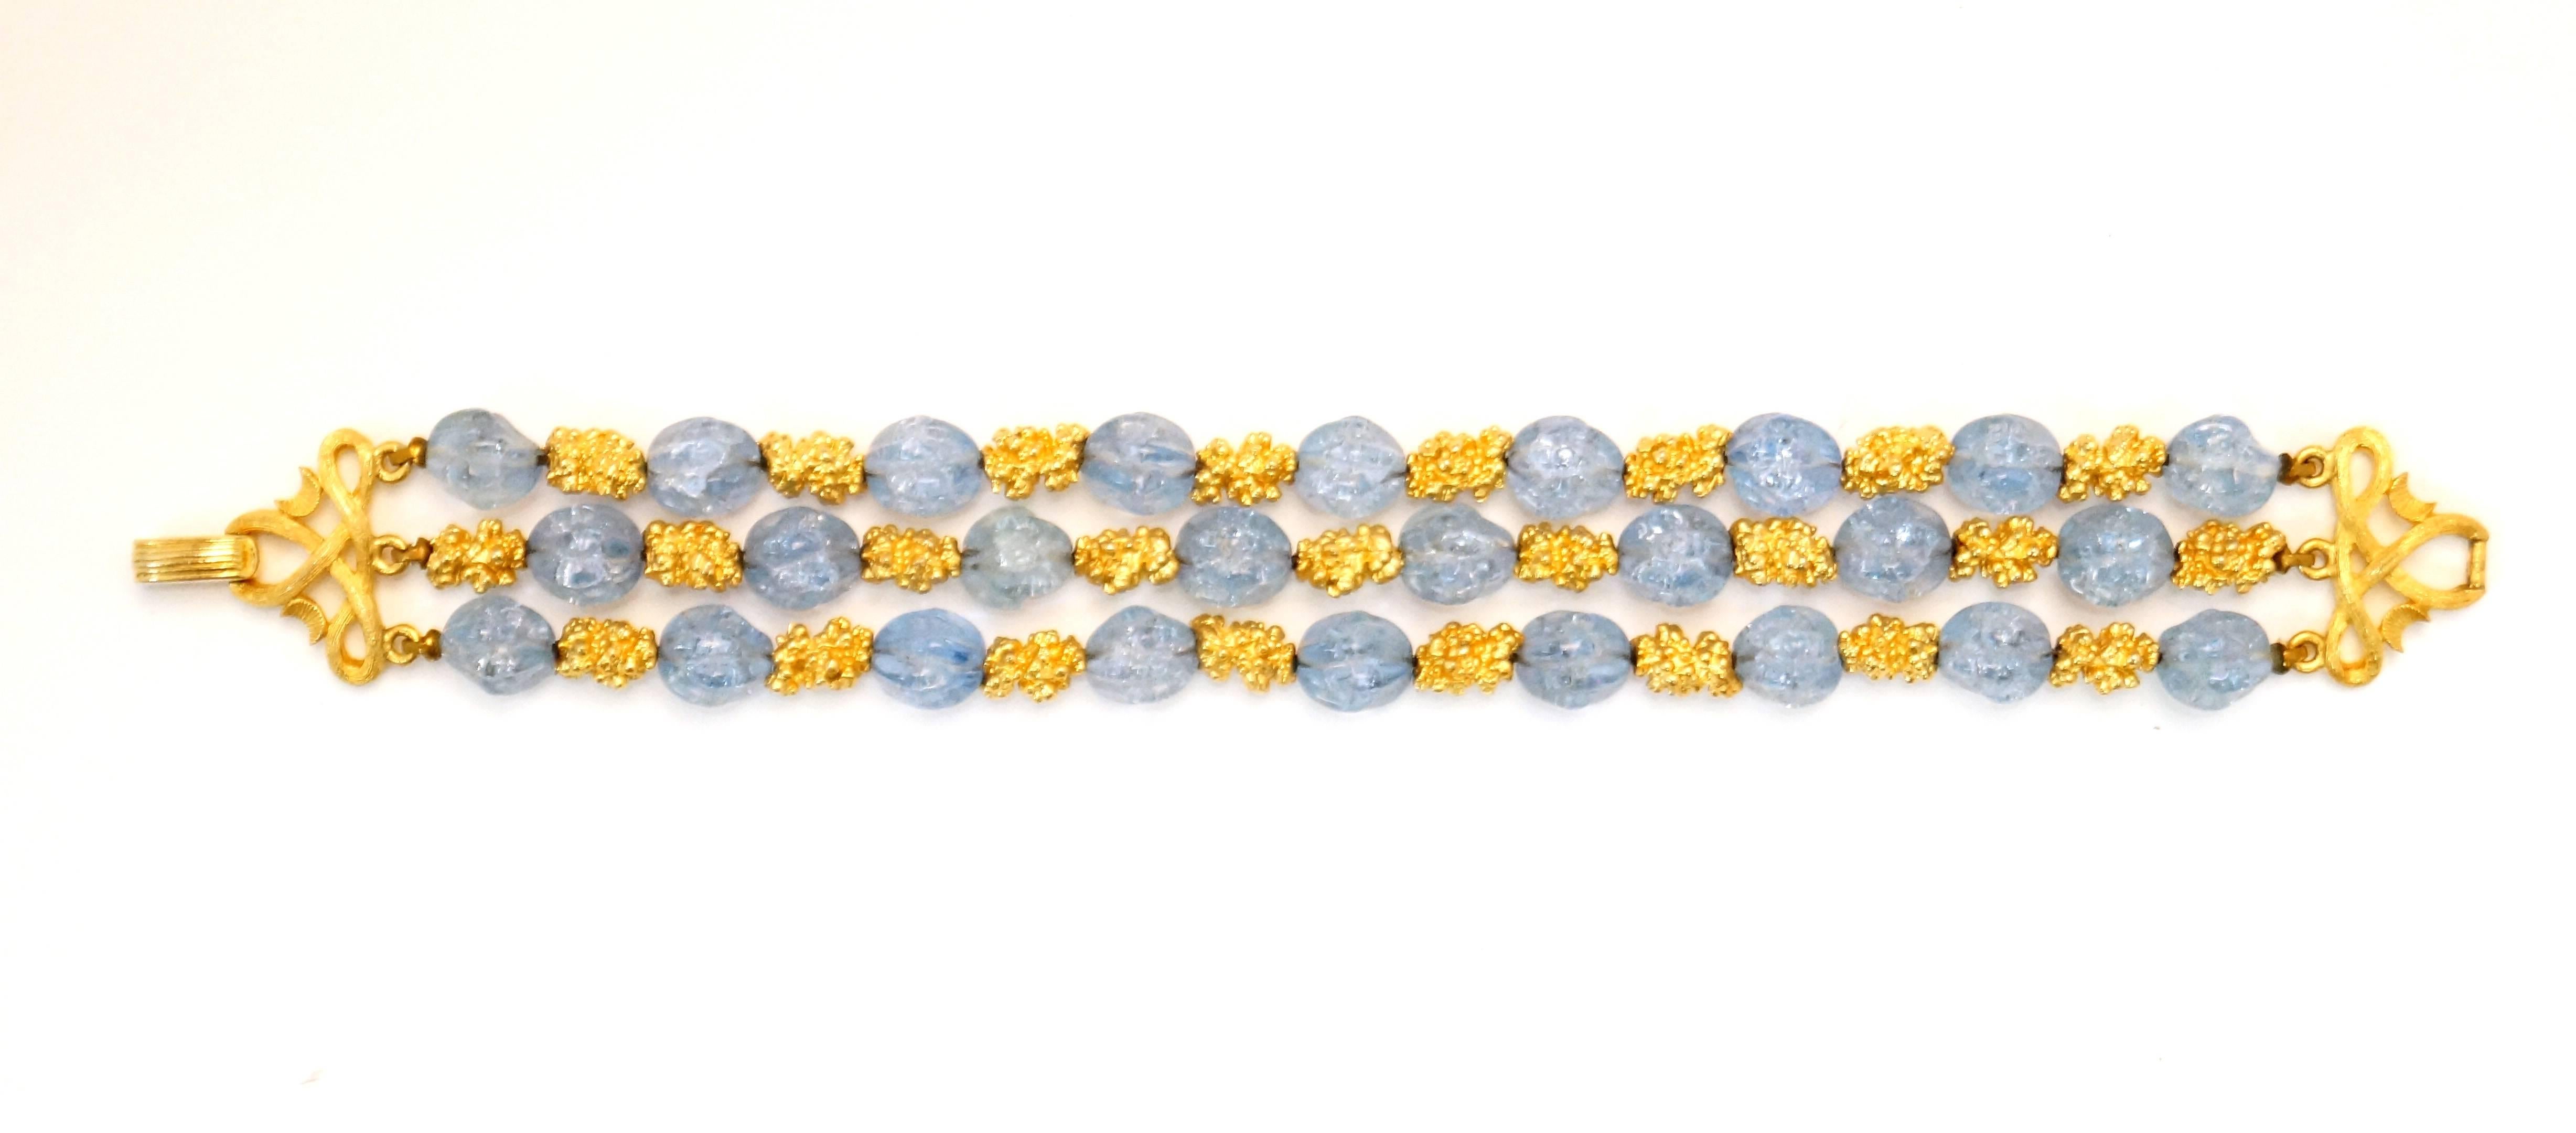 1950s Trifari Grand Parure - Blue Rhinestone with Gold Tone Nugget Spacers For Sale 1